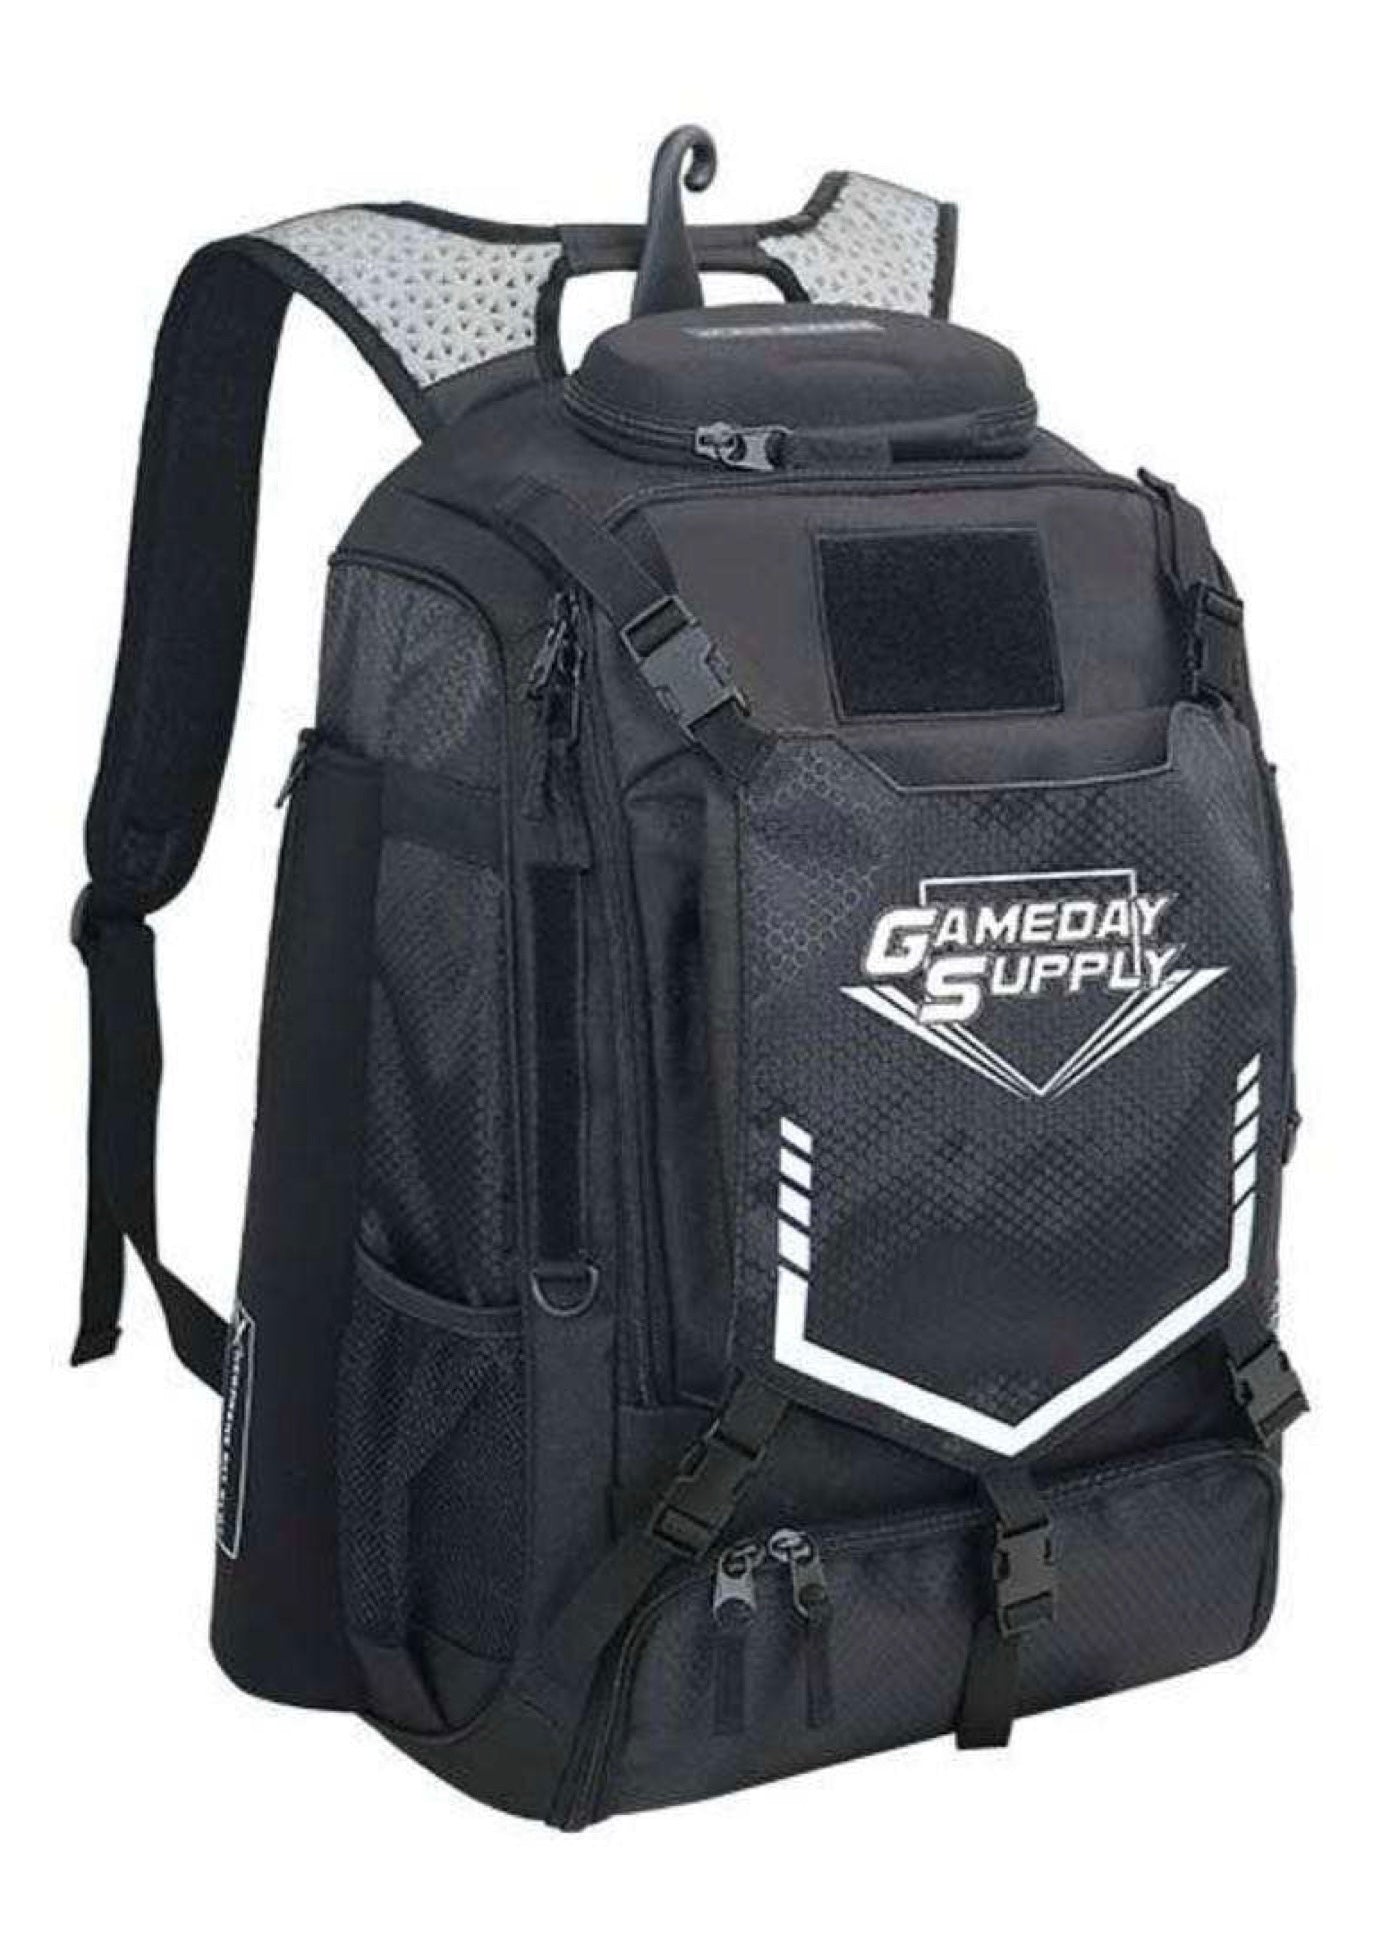 Gameday Supply "Dugout" backpack